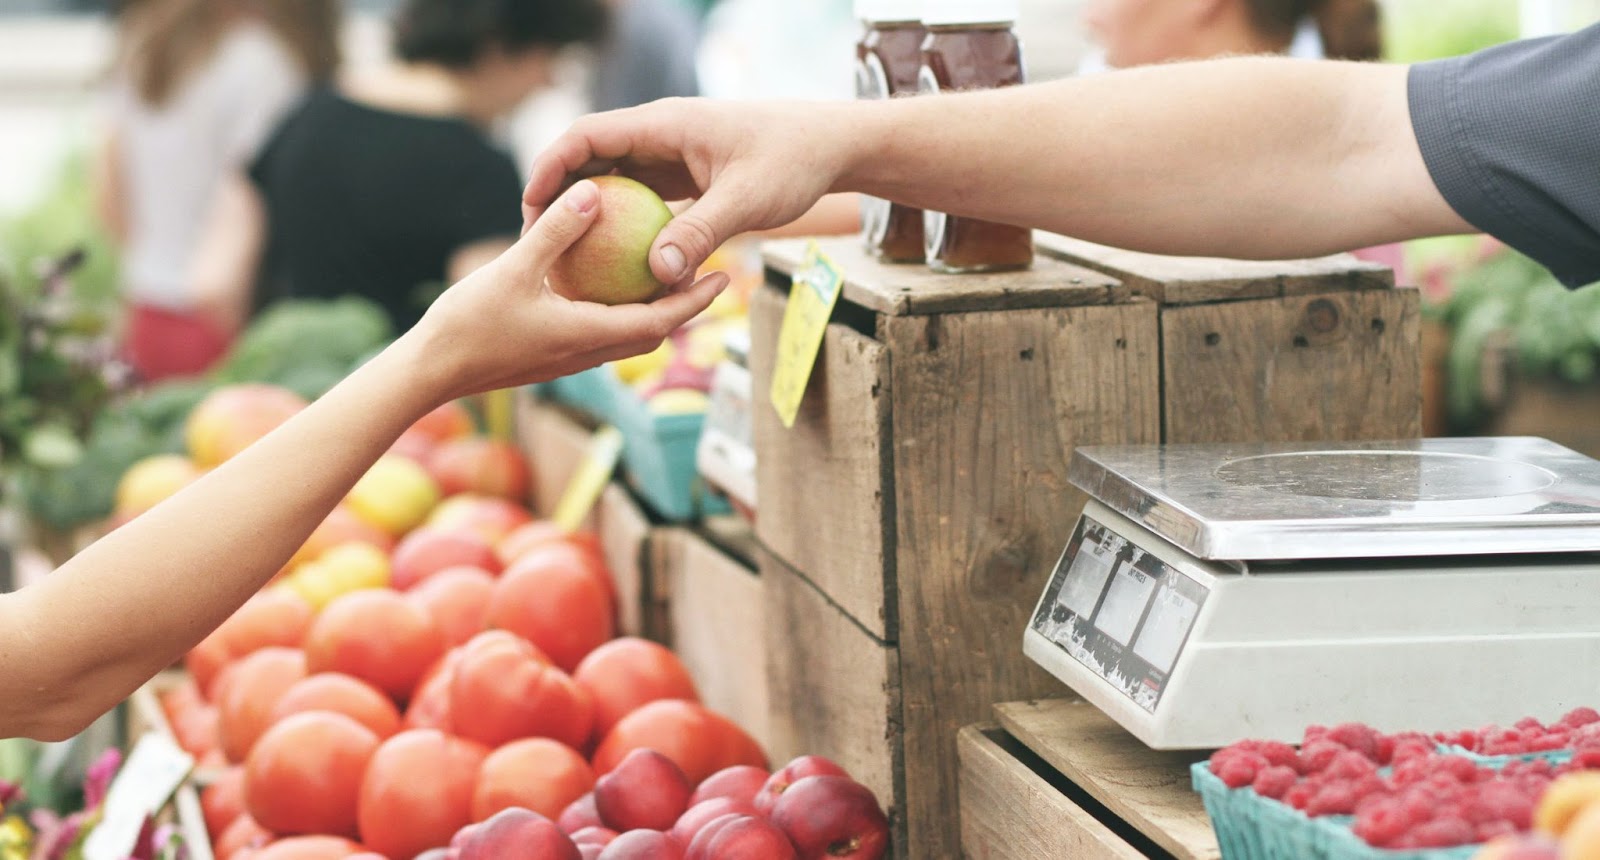 Fresh produce department scene: a small person hands a piece of fruit to a clerk to weigh on a scale. Learn how automation in grocery stores can save you time and money.